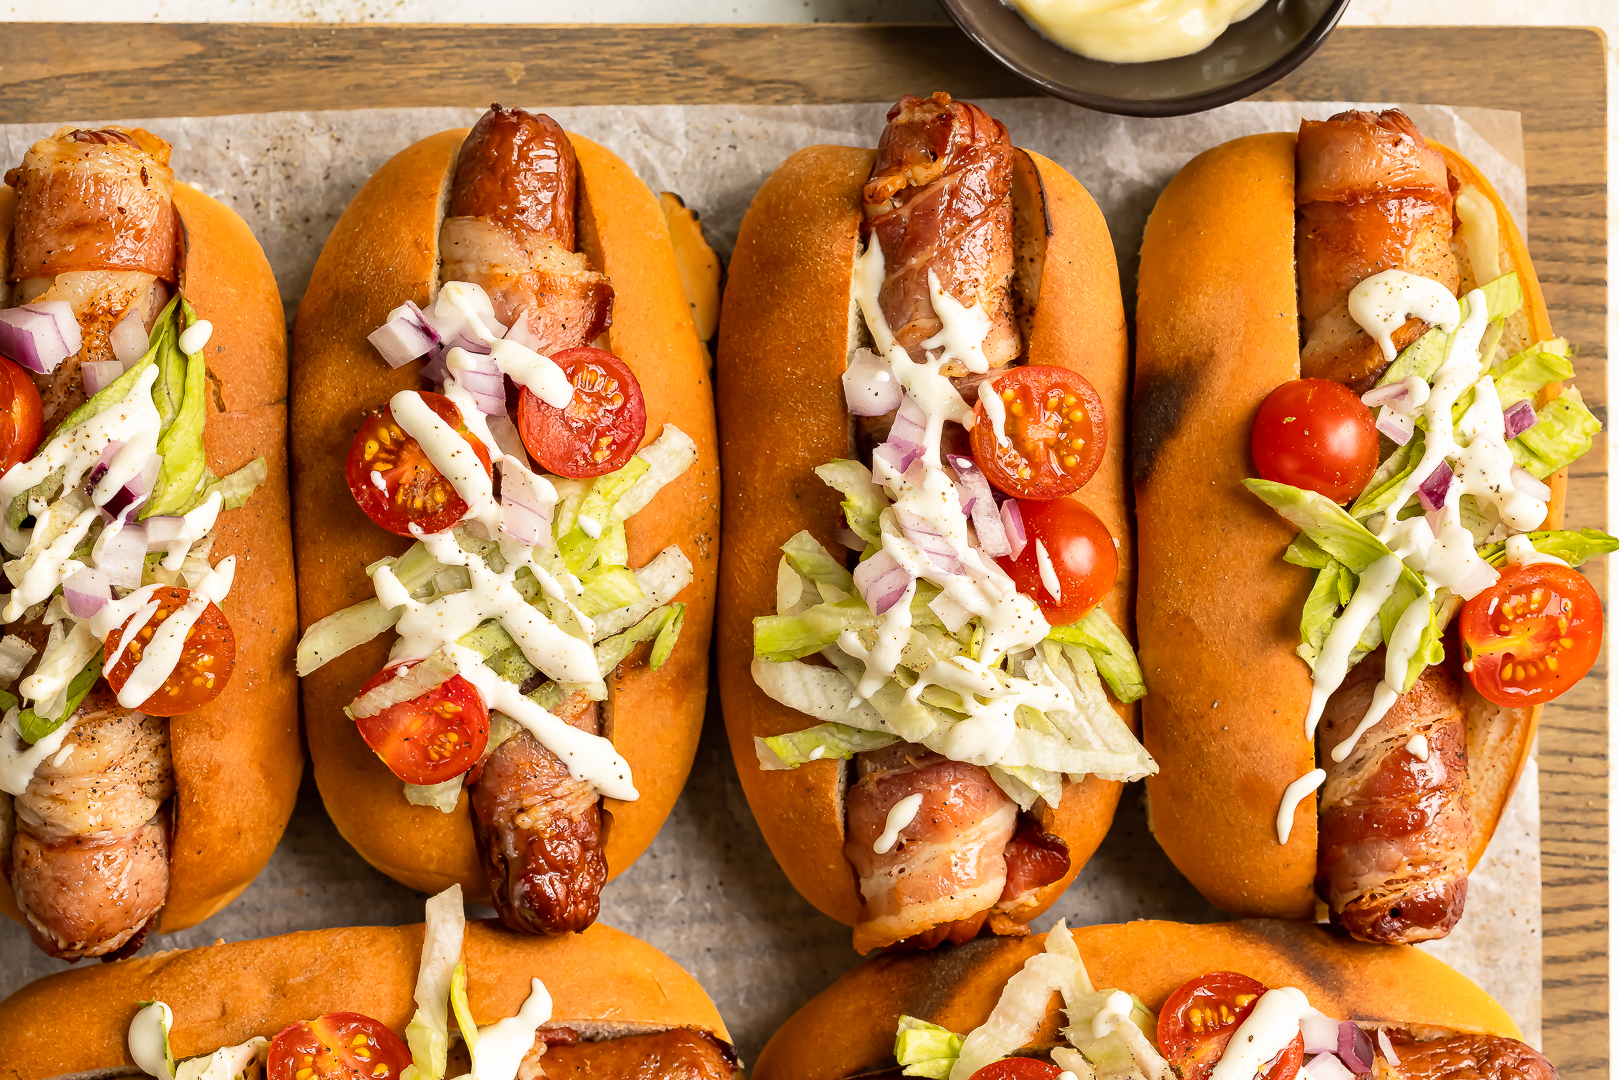 https://www.nospoonnecessary.com/wp-content/uploads/2015/06/Bacon-wrapped-hot-dogs.jpg